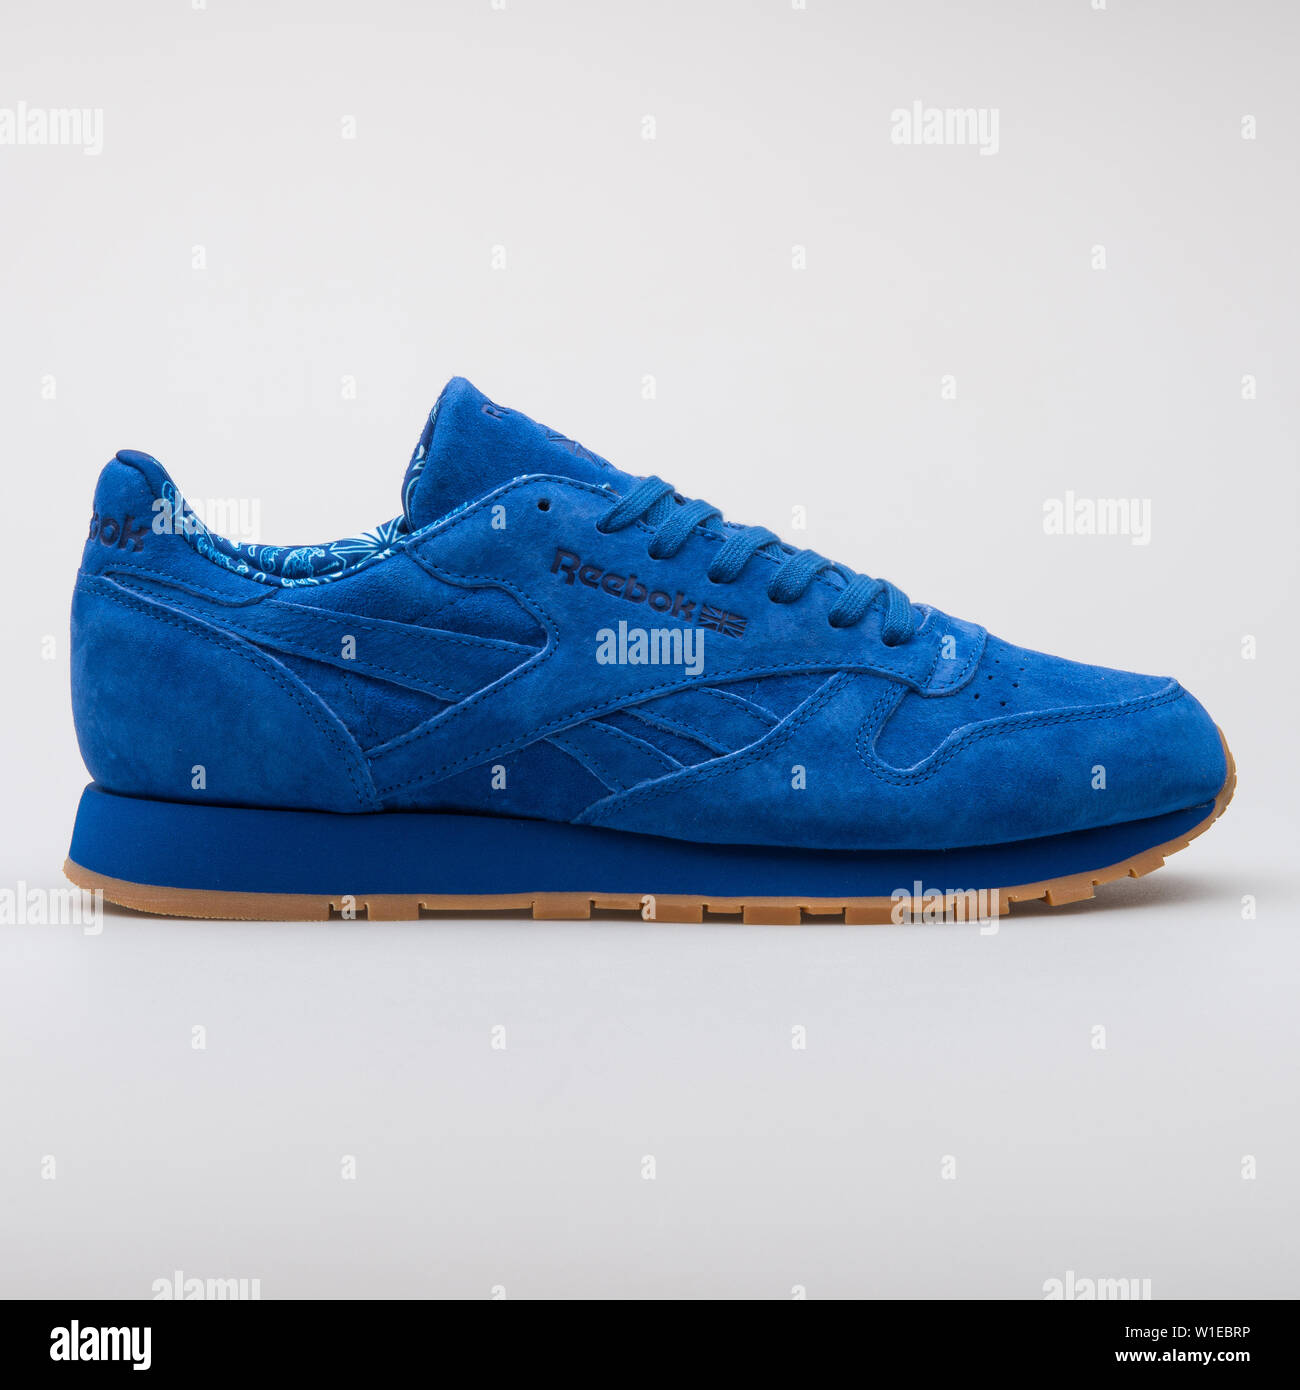 VIENNA, AUSTRIA - AUGUST 7, 2017: Reebok Classic CL Leather TDC blue  sneaker on white background Stock Photo - Alamy